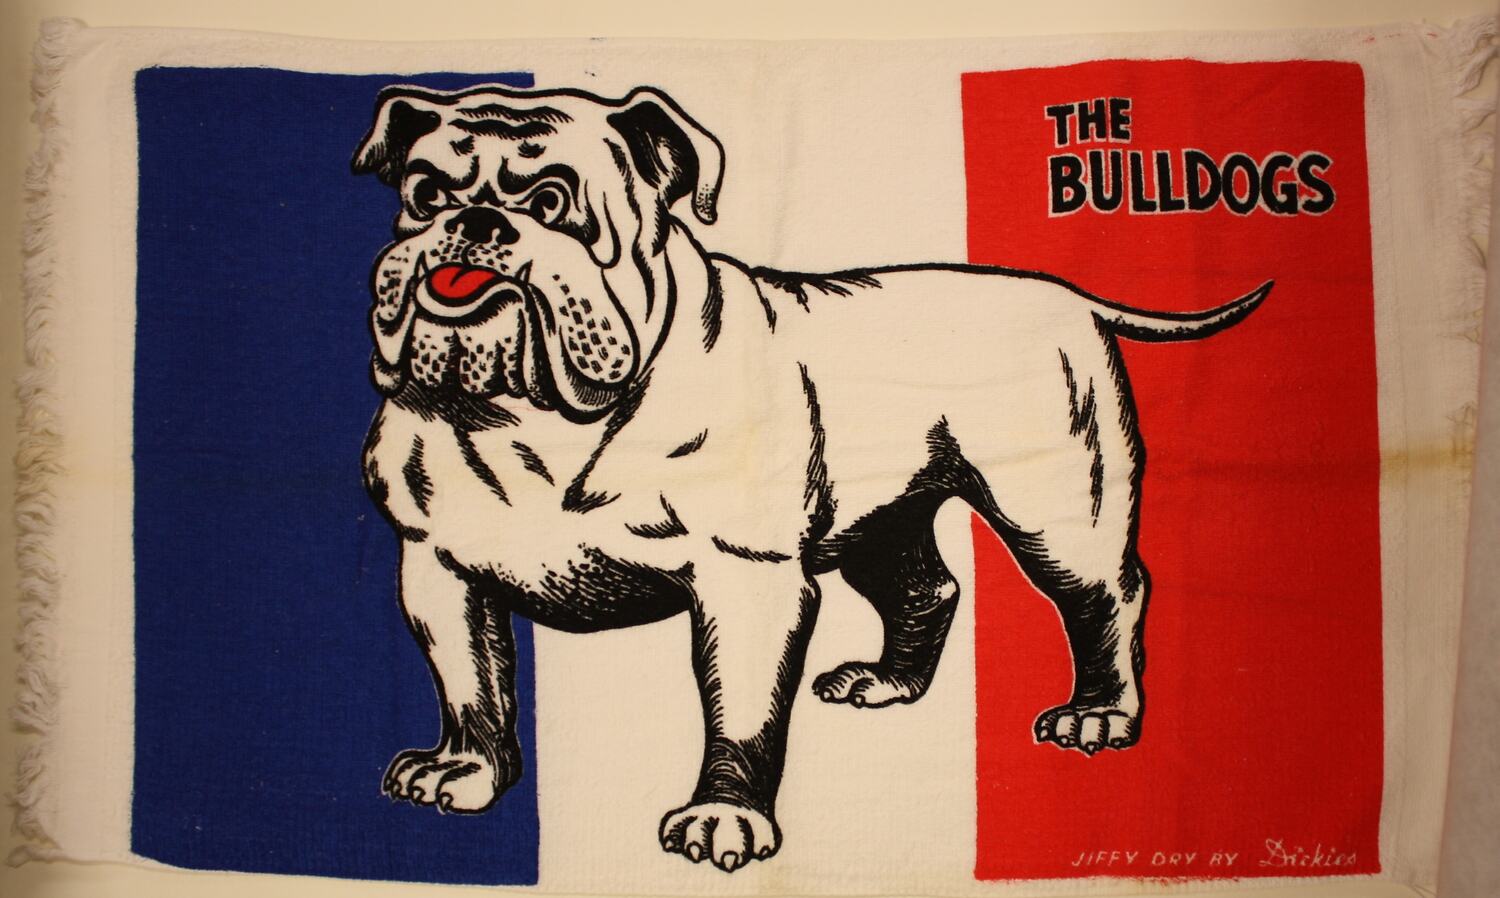 A tea towel with a bulldog on it along with the words "The Bulldogs"